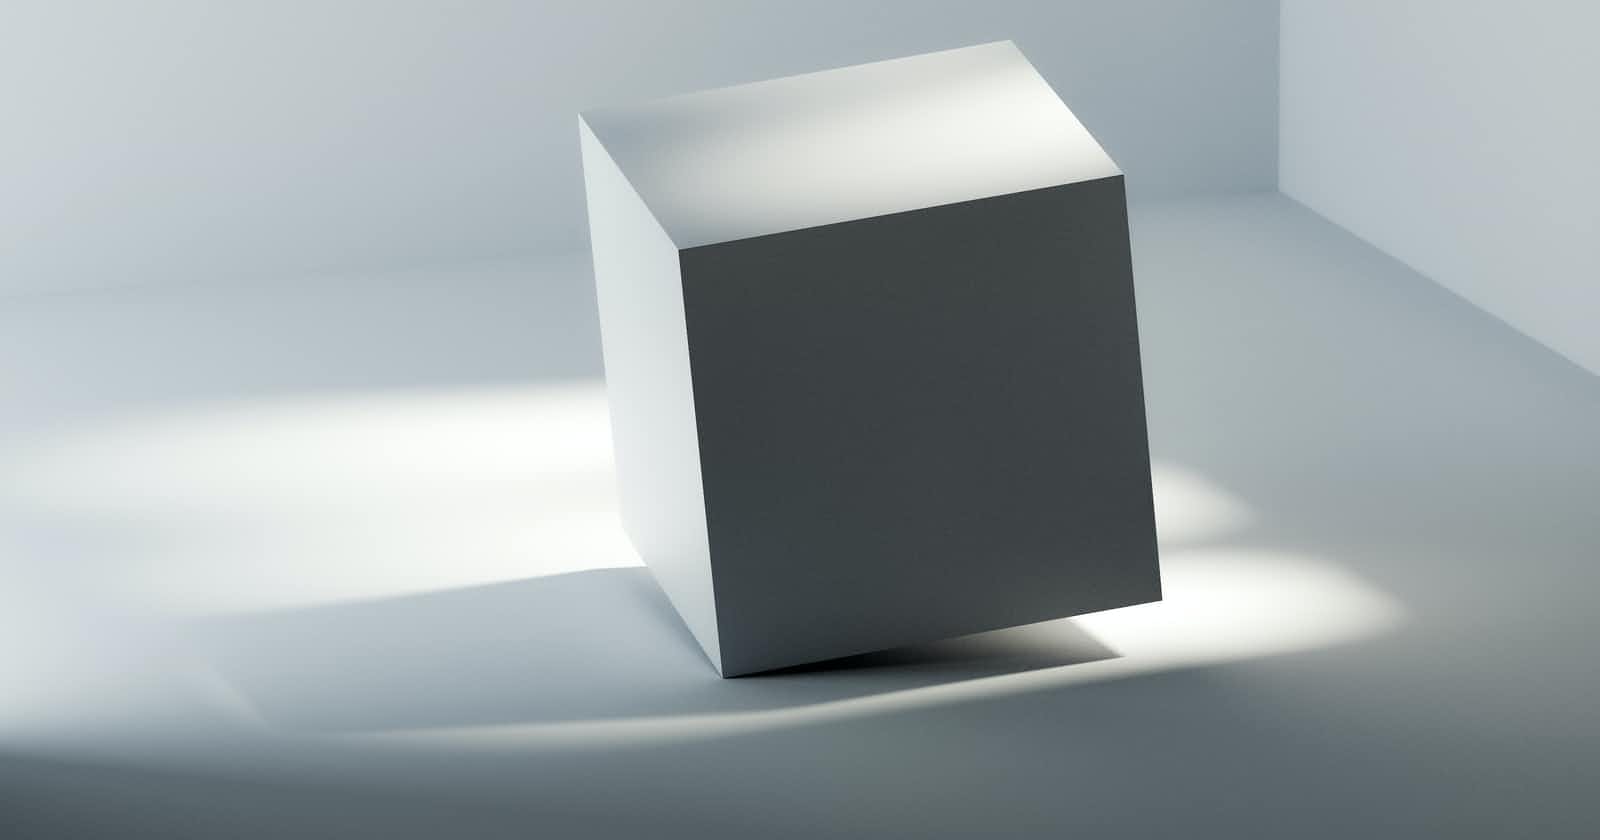 The mystery of the box-shadow.